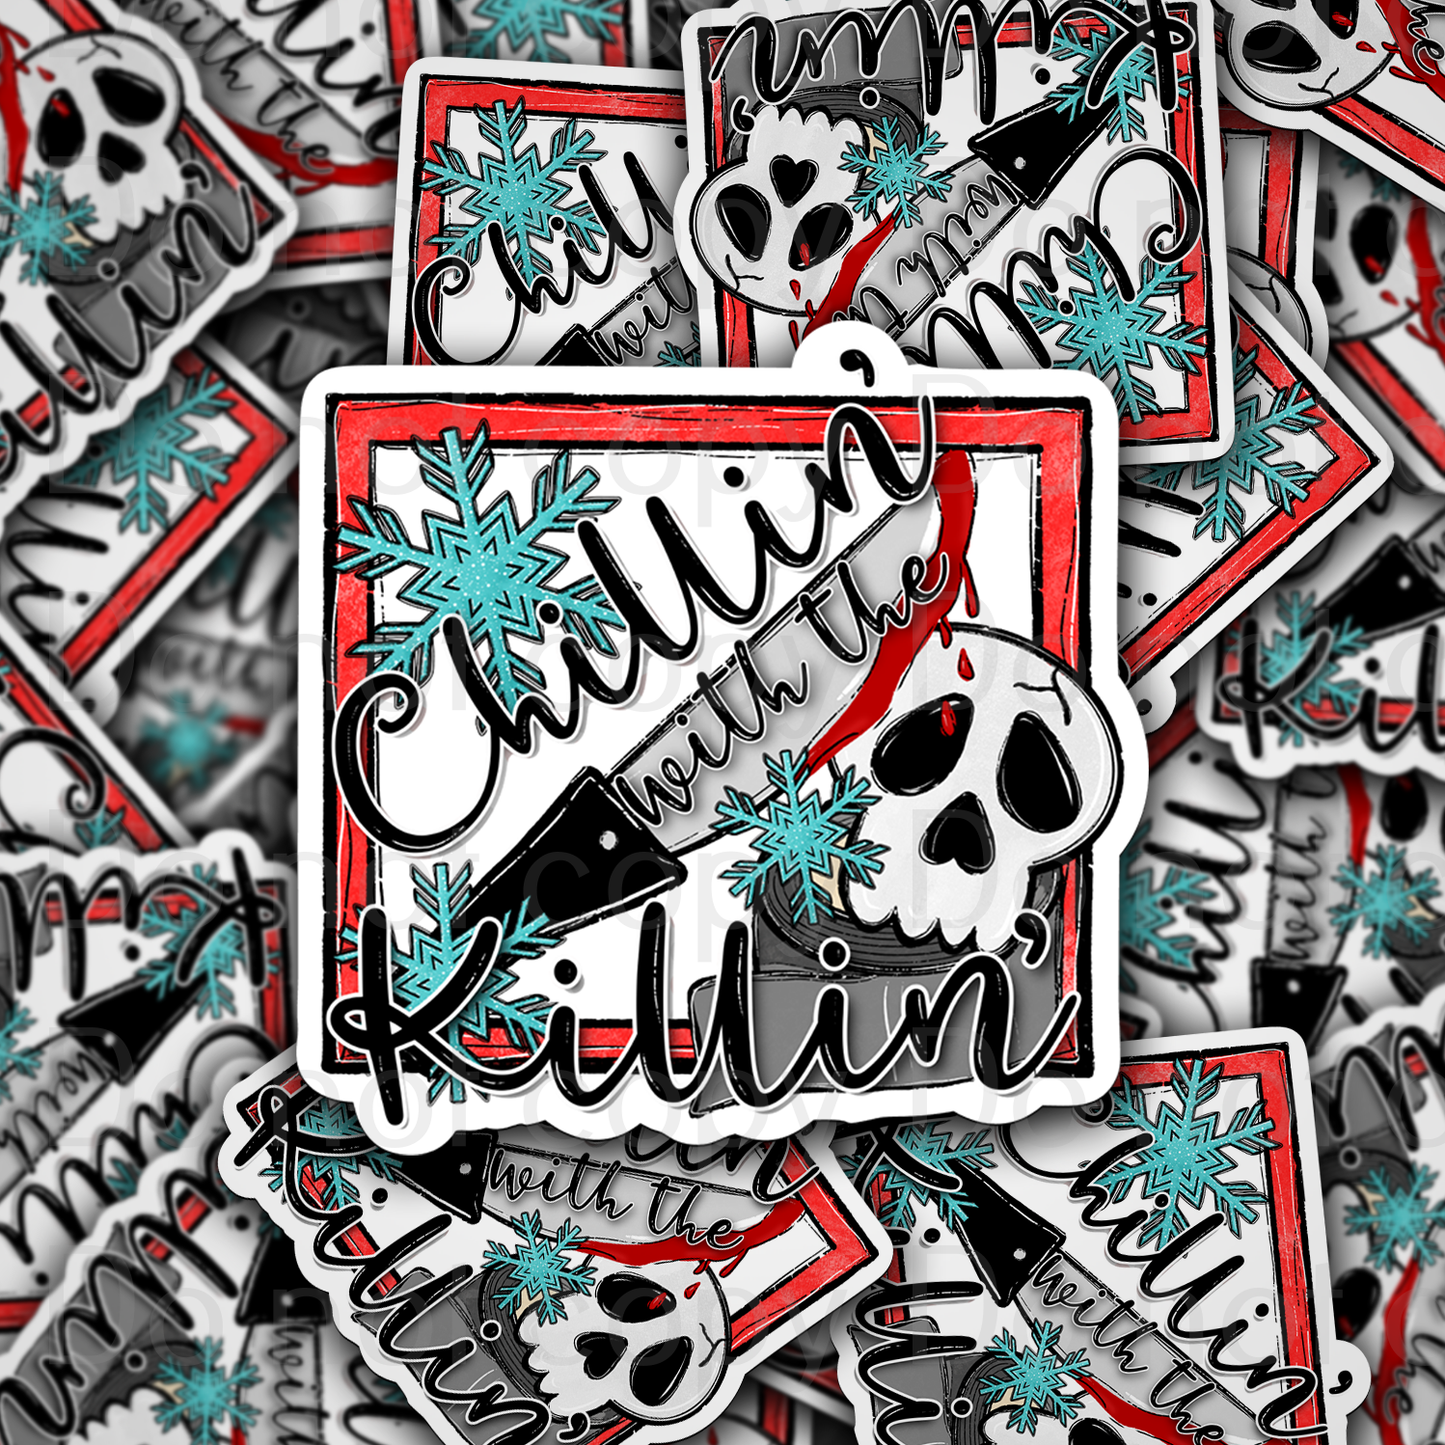 Chillin' with the killin' Die cut sticker 3-5 Business Day TAT